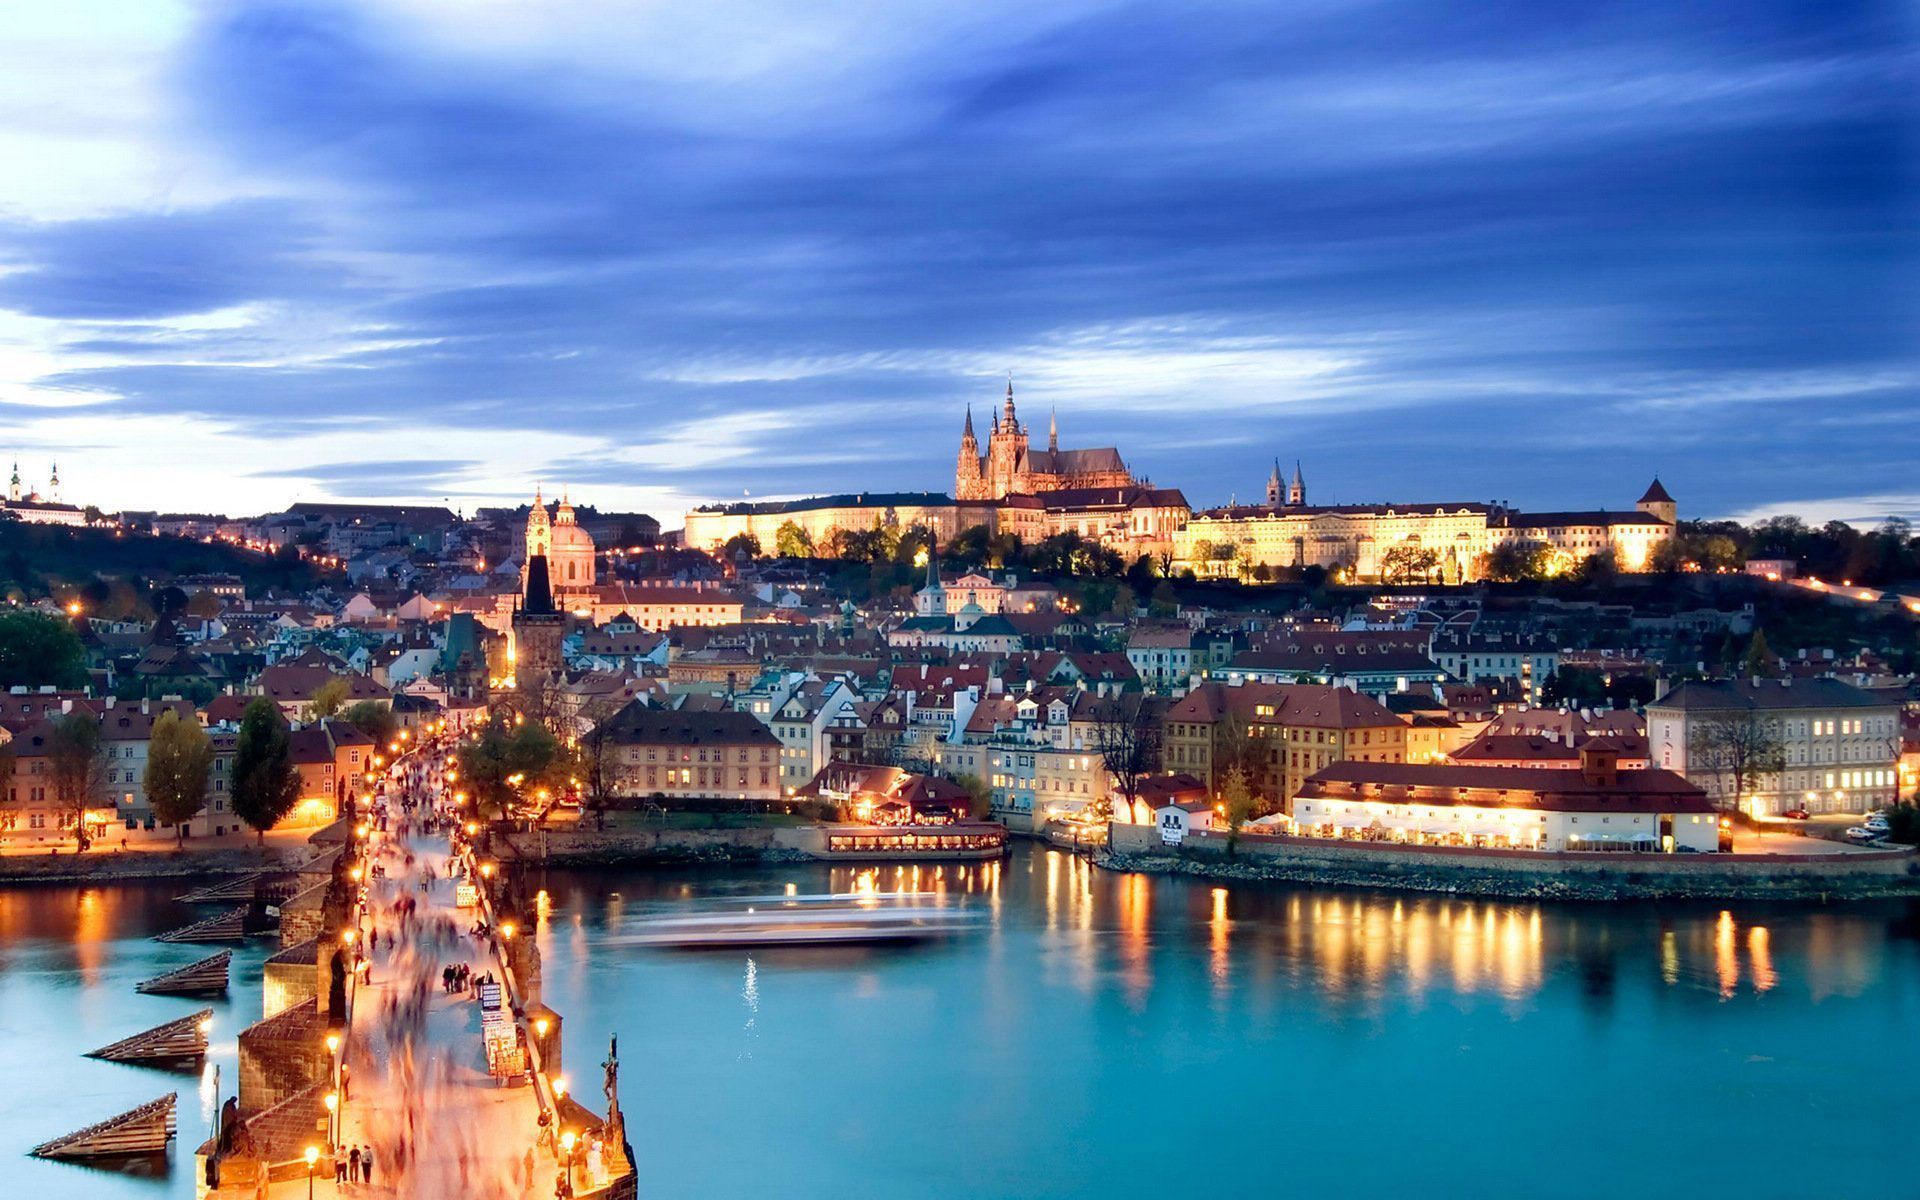 This is a breathtaking view of the city of Prague, taken at dusk. The Vltava River winds through the city, with the Charles Bridge stretching across it. The city is lit up, highlighting the beautiful architecture. In the distance, the Prague Castle sits atop the city, overlooking all below. The sky is a mix of blue and purple, with wispy clouds adding to the overall beauty of the scene. - 1920x1200